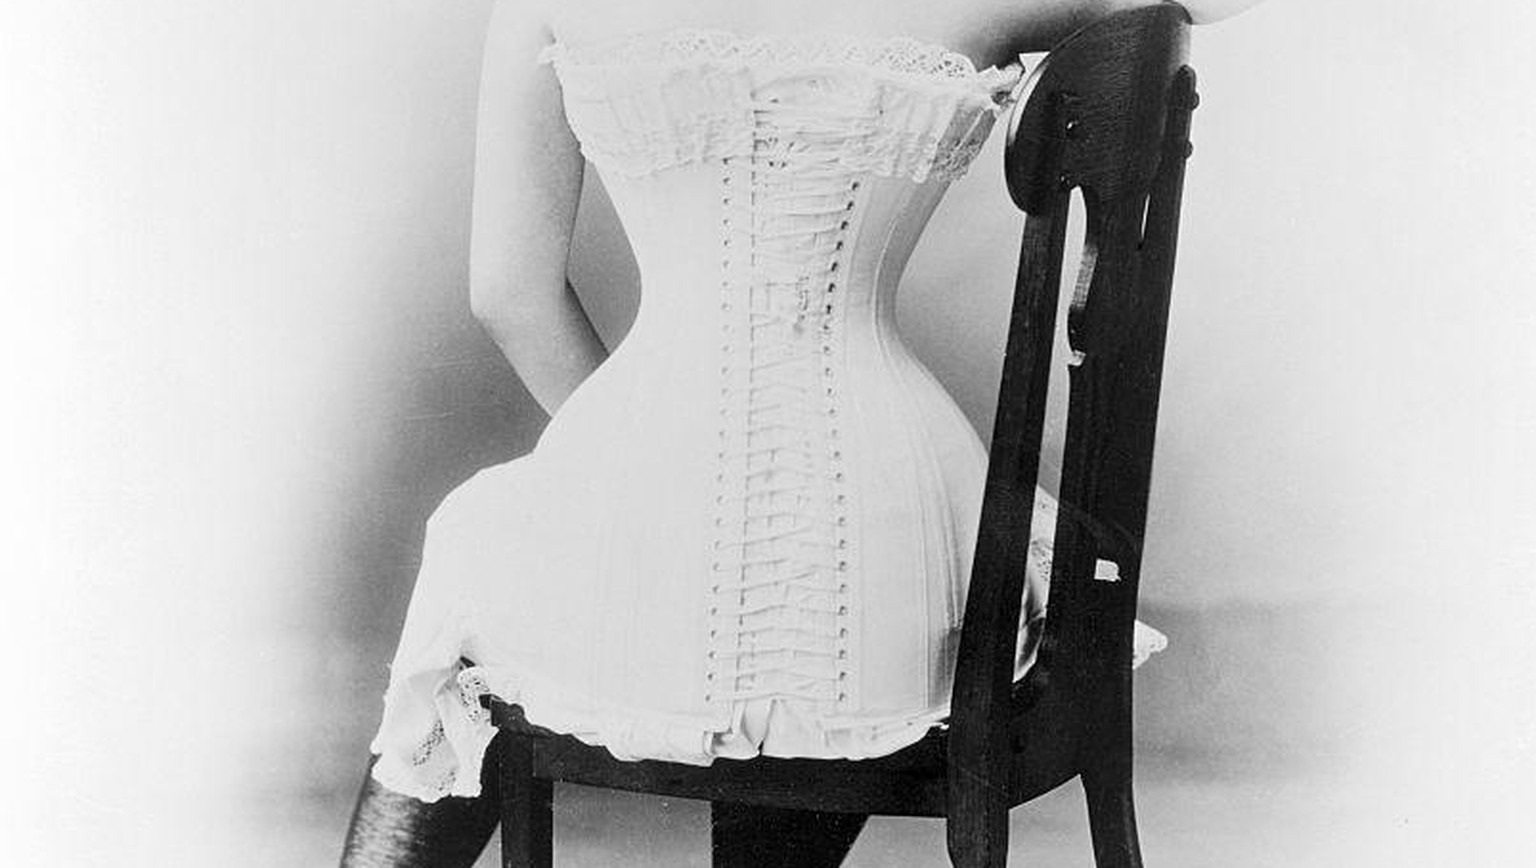 ORIGINAL CAPTION READS: Young lady in victorian corset. Back view seated in chair. Undated photograph.